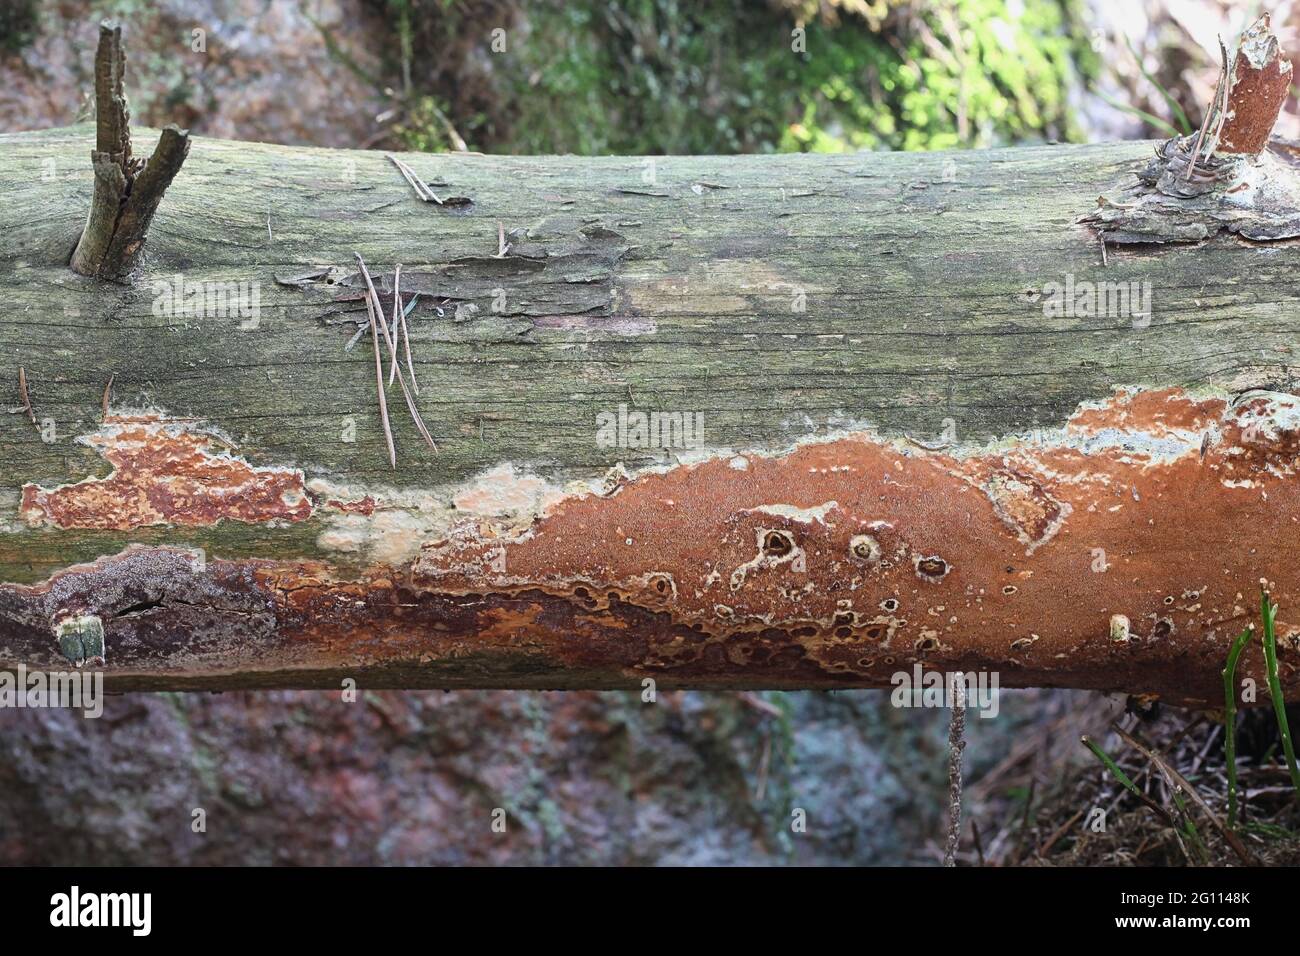 Meruliopsis taxicola, also called Gloeoporus taxicola, a crust fungus from Finland with no common English name Stock Photo